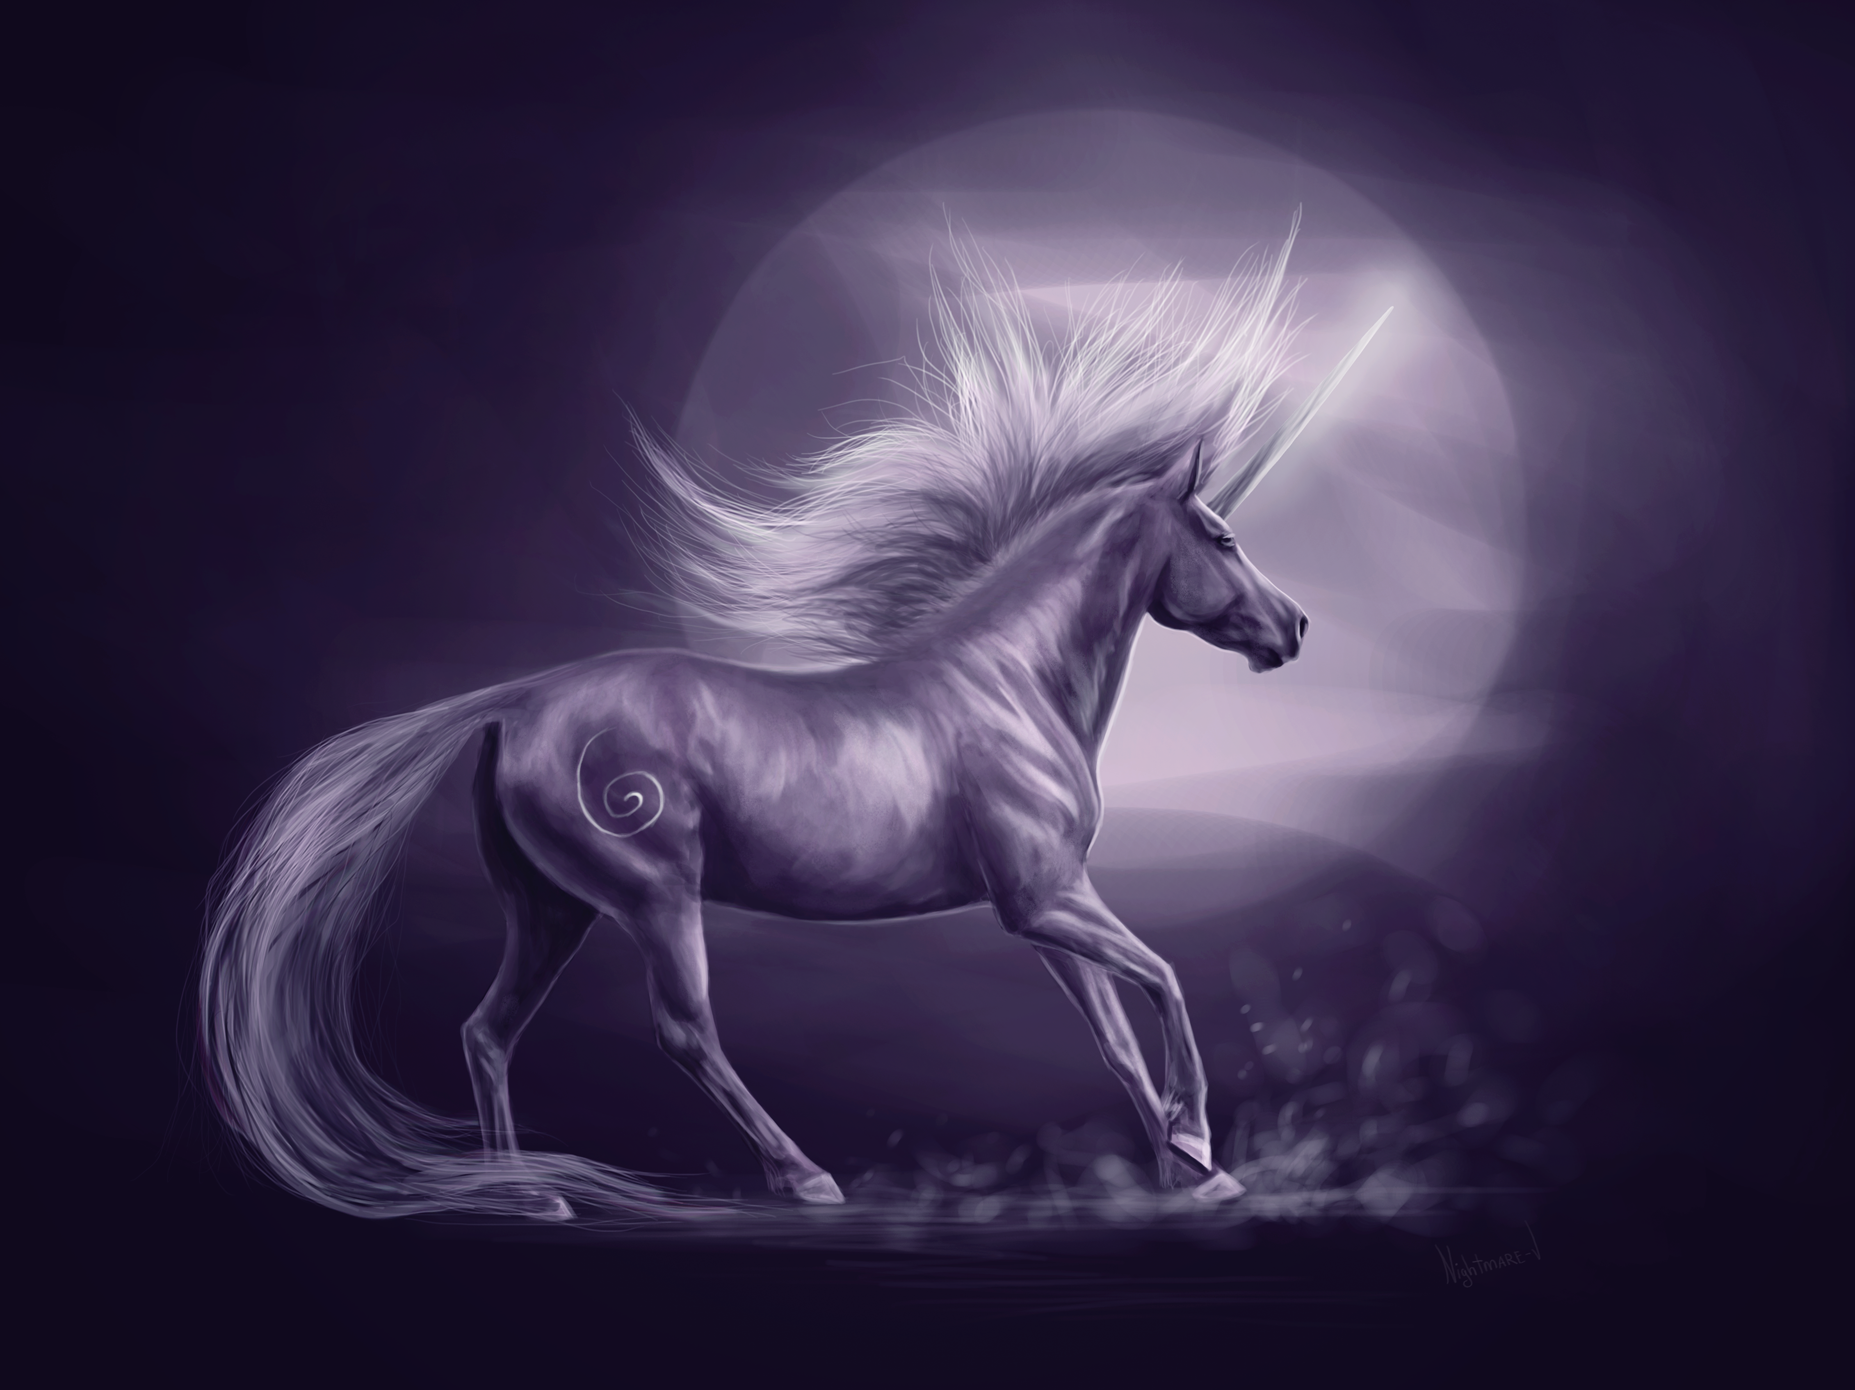 Unicorn. In Greek mythology there are no unicorns, but there is